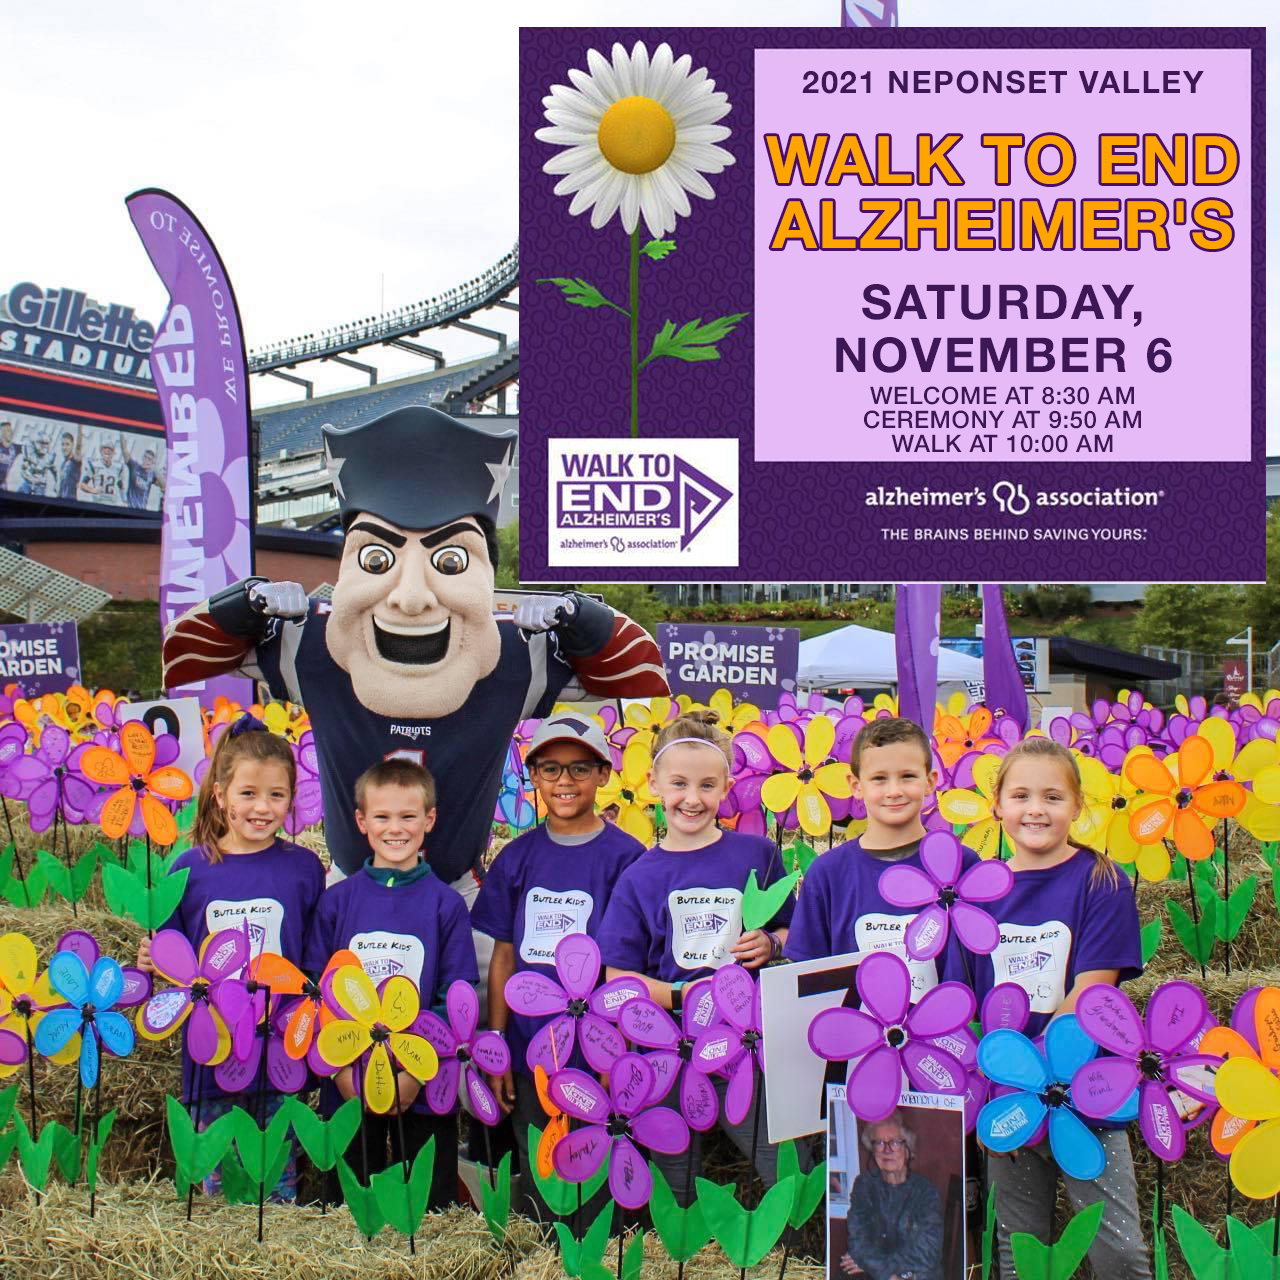 2021 Neponset Valley Walk To End Alzheimer's